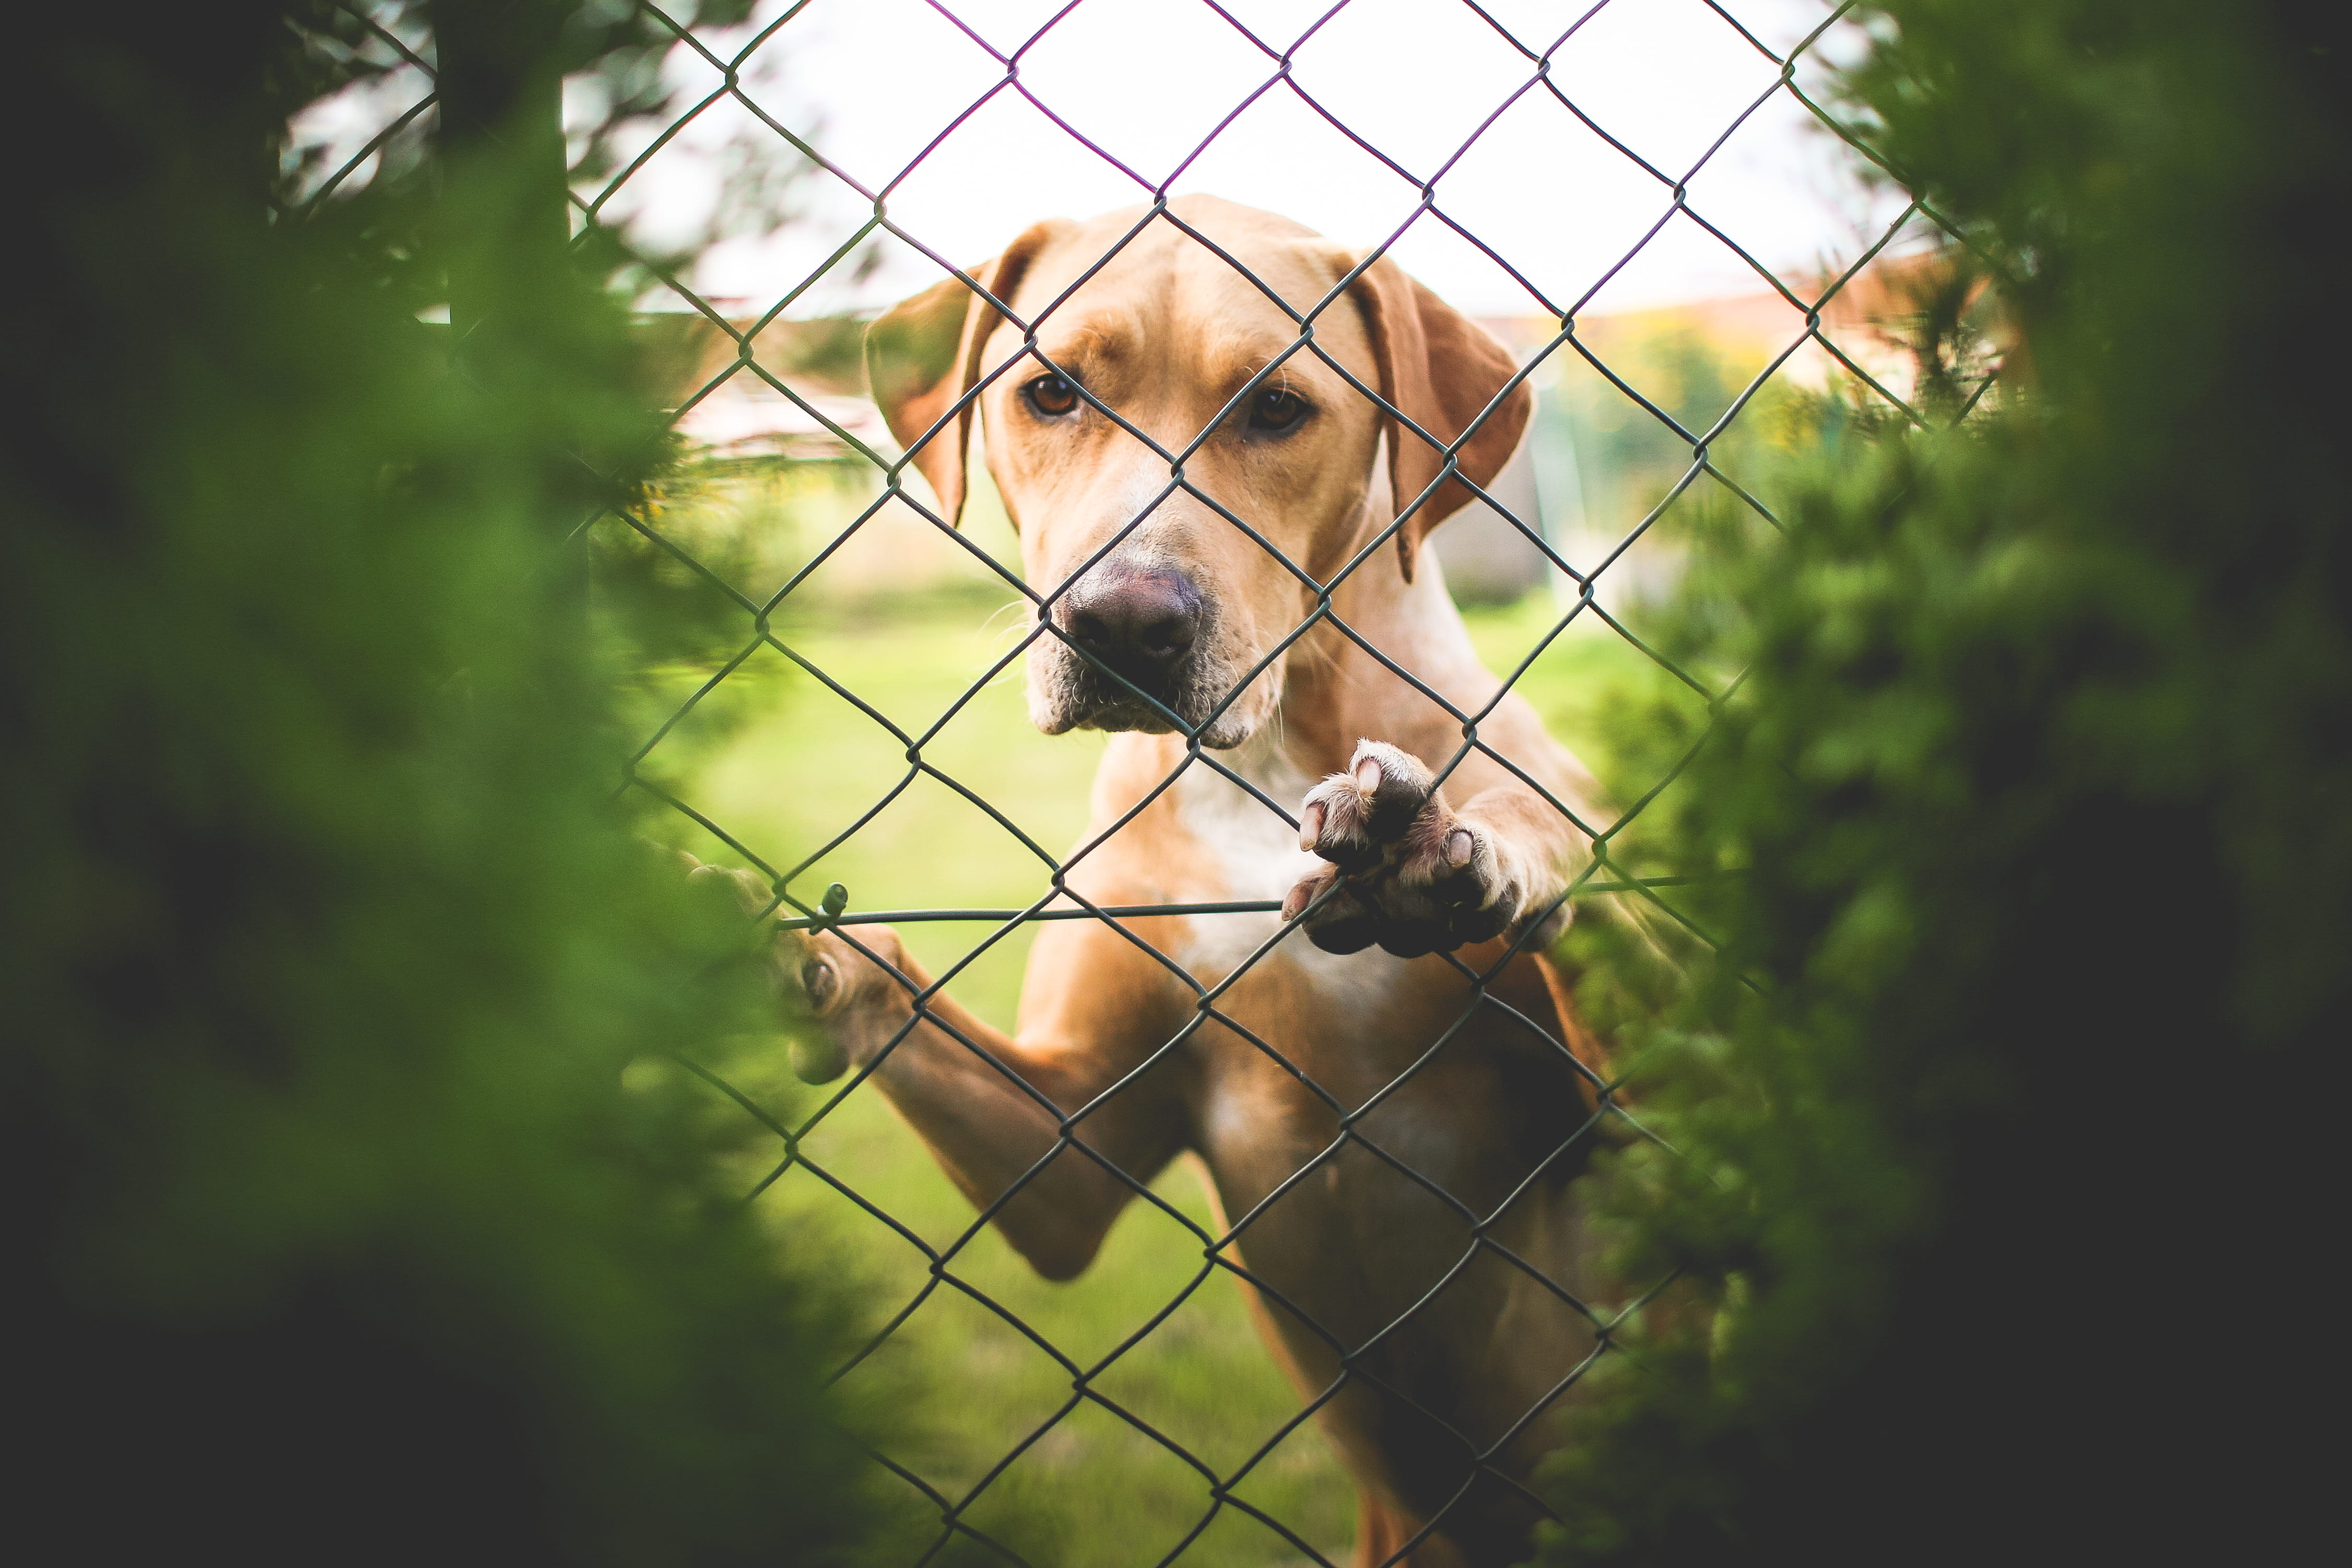 Golden Retriever Behind The Fence, animal, dogs, gardens, pets